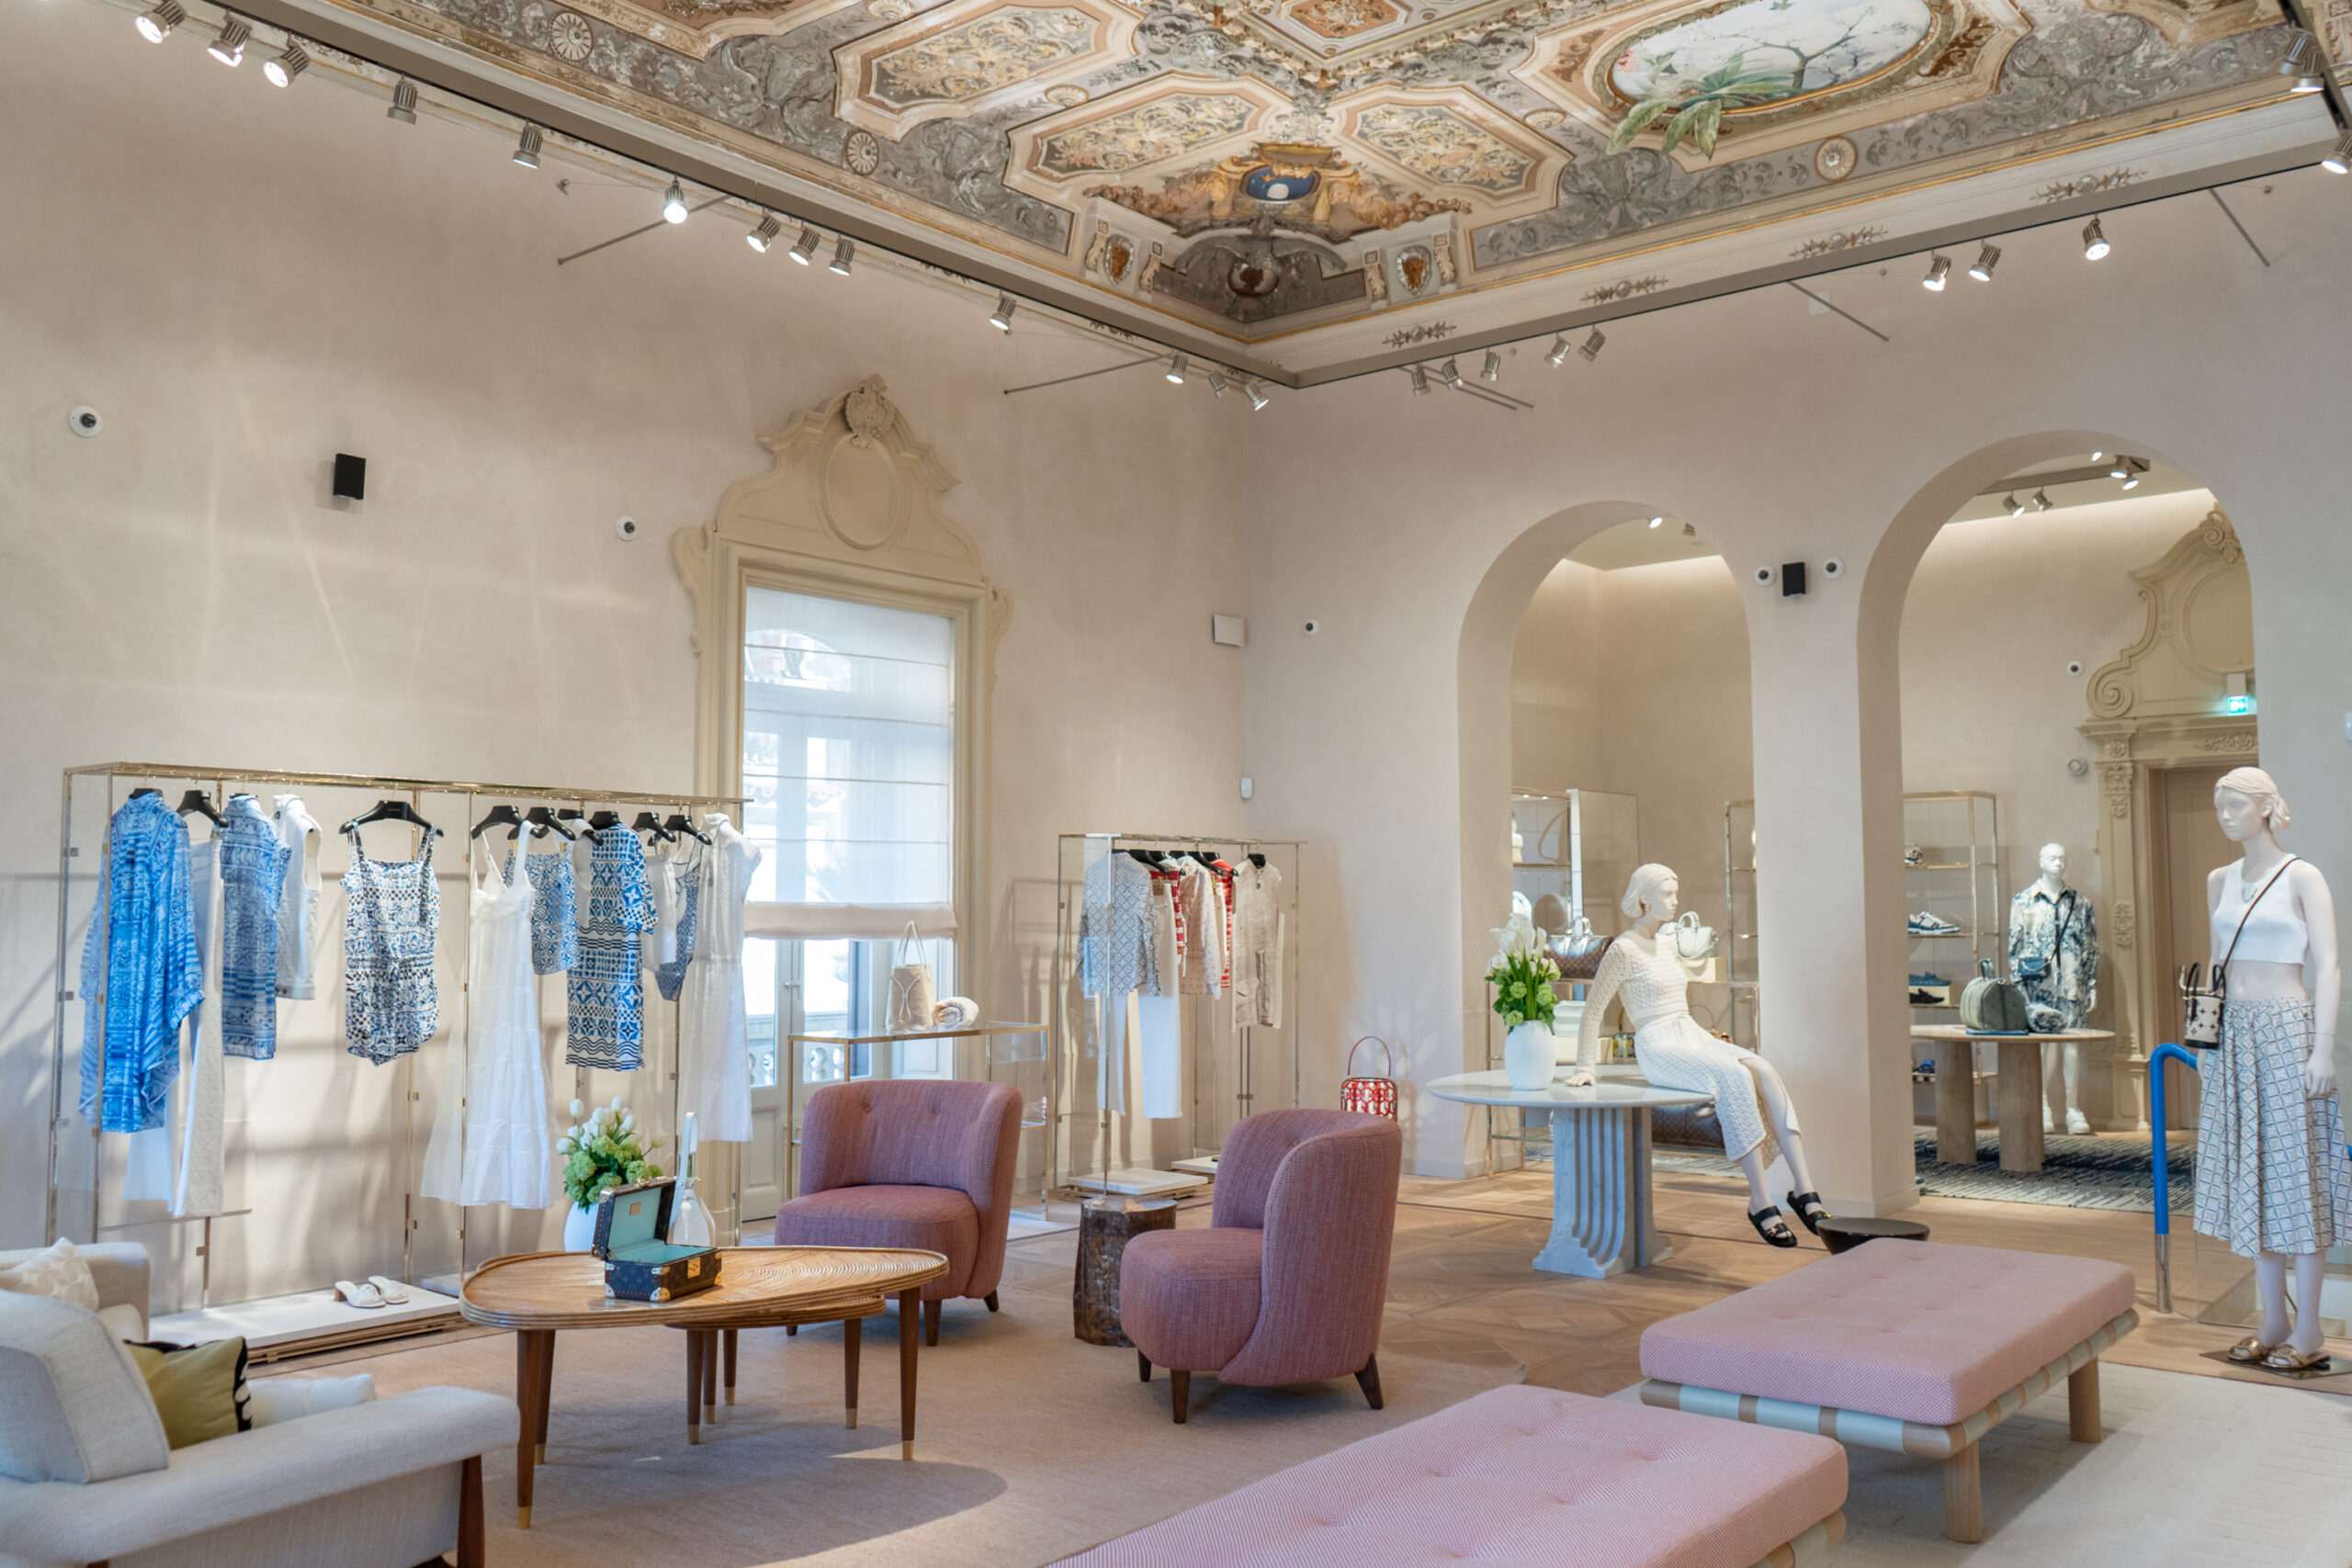 Louis Vuitton Opens Café in Taormina: Everything You Need to Know – WWD